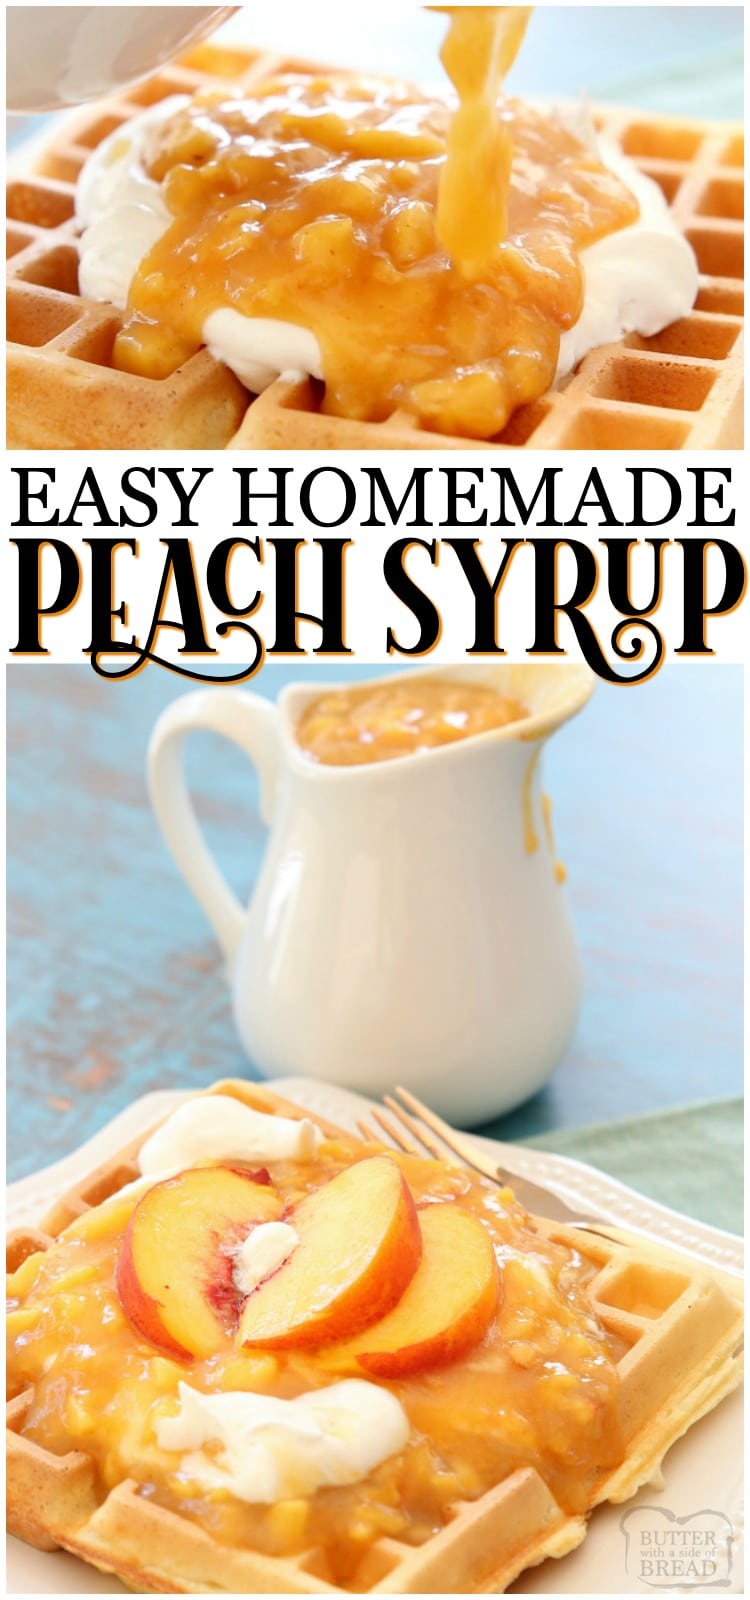 Chunky Peach Syrup made easy in 10 minutes in the microwave! Bursting with sweet peach flavor, this Homemade Peach Syrup is a fantastic way to use fresh peaches! #peach #syrup #homemade #recipe #peaches from BUTTER WITH A SIDE OF BREAD